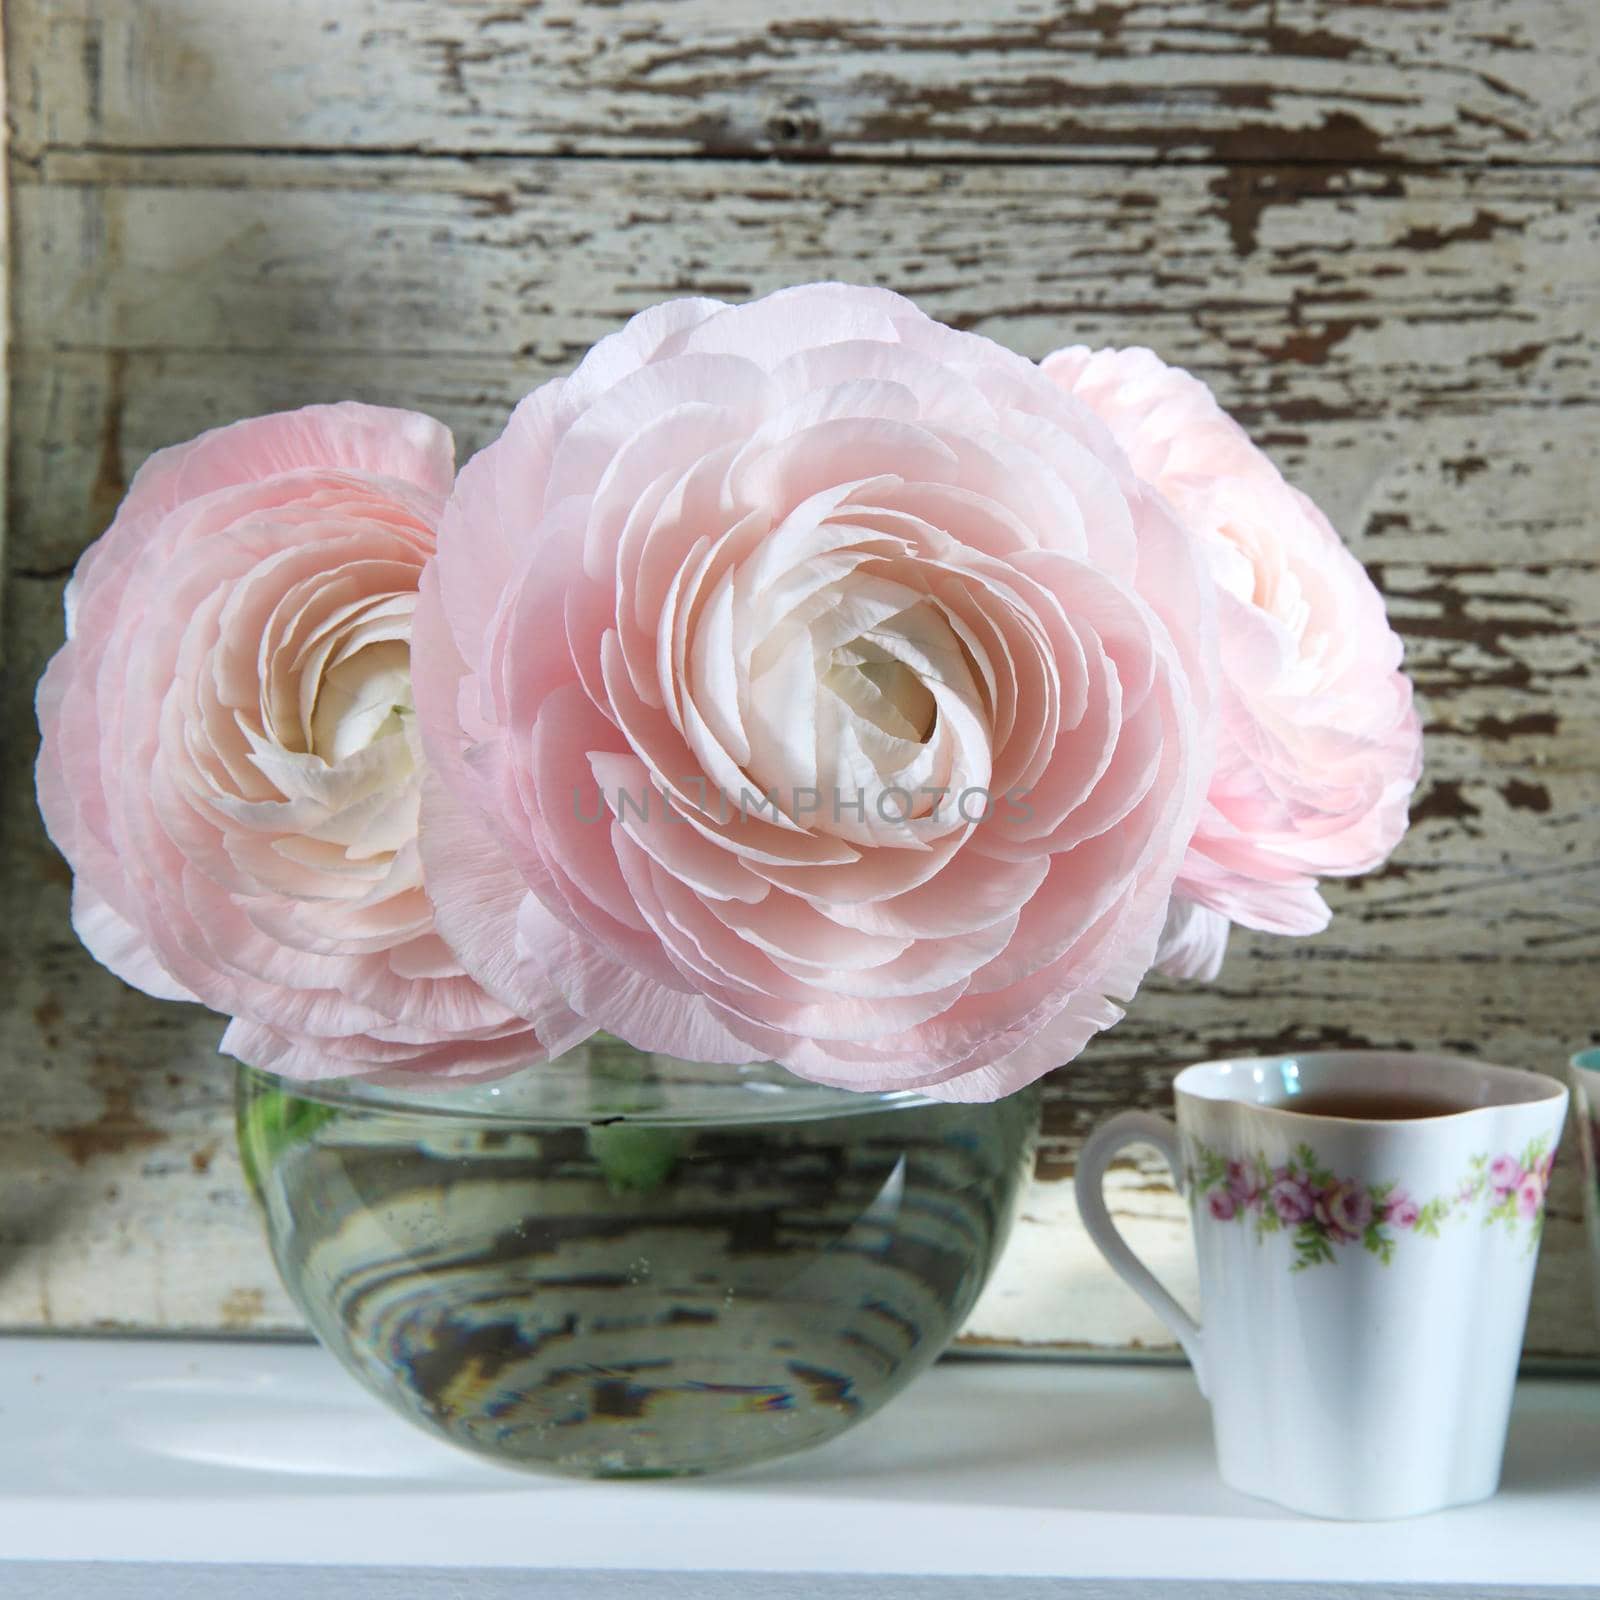 Three pale pink ranunculus in a transparent round vase on the white windowsill. Copy space. Place for text